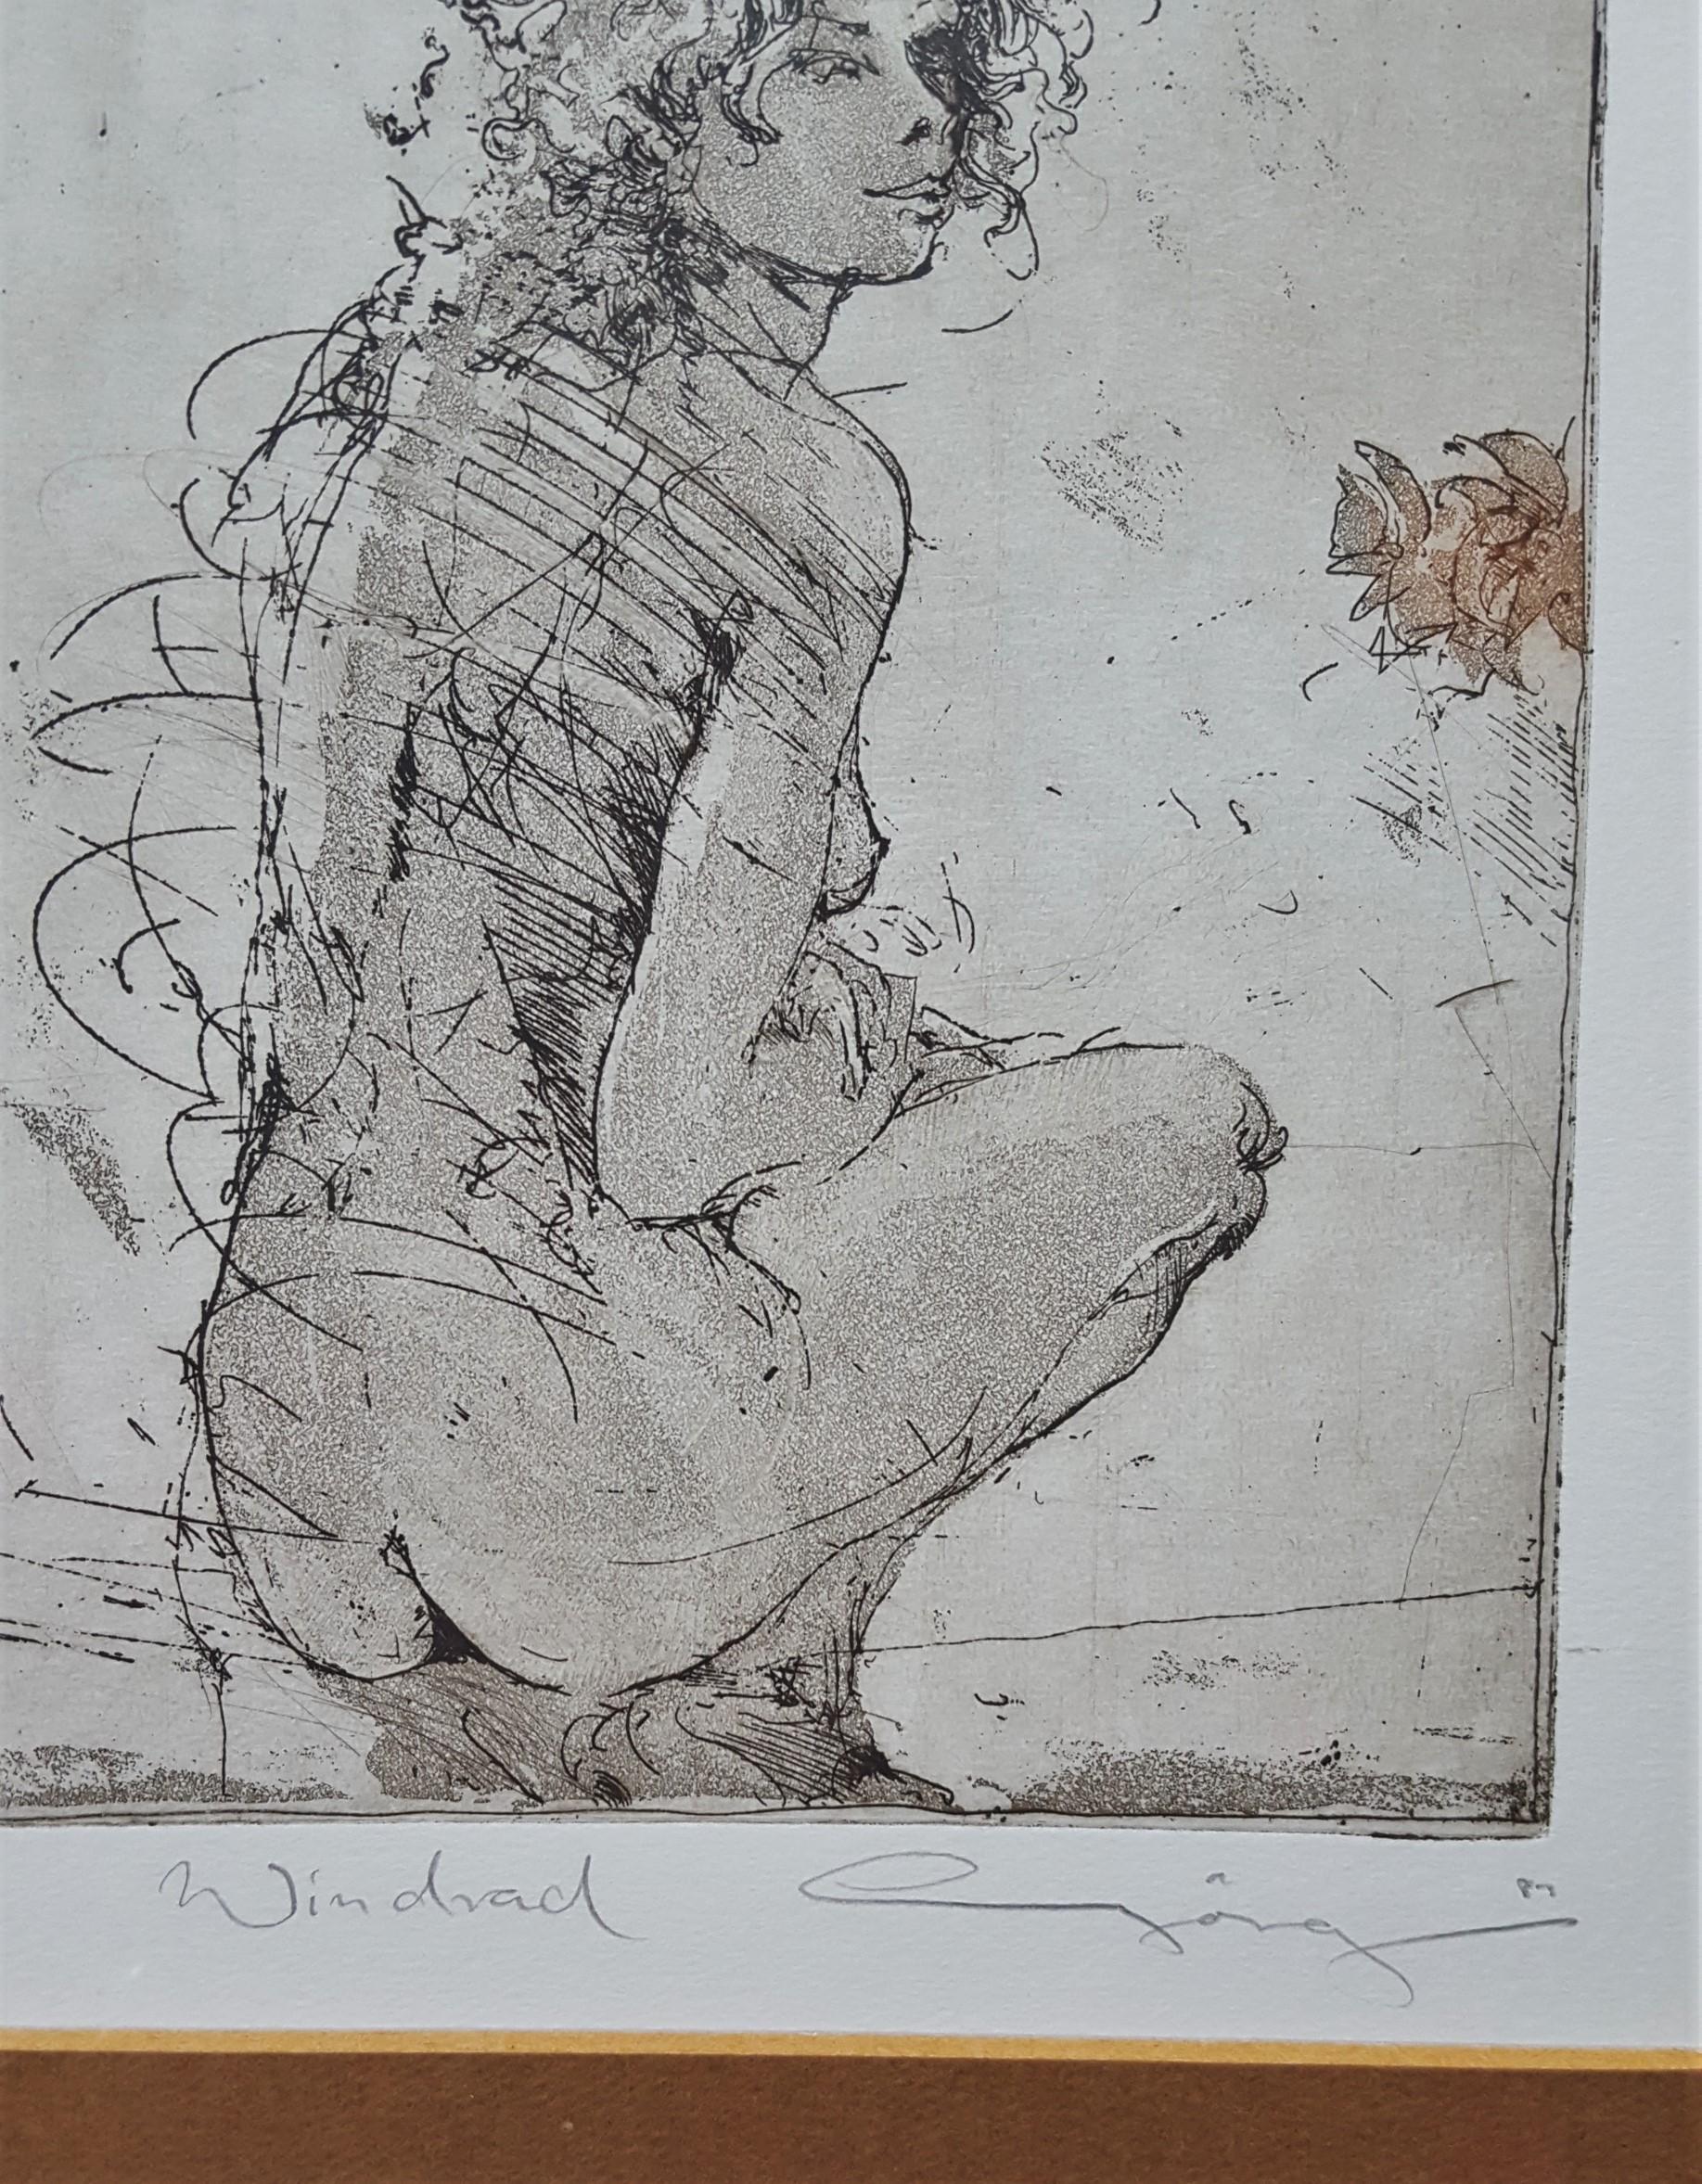 An original signed etching and aquatint on white wove paper by German artist Jurgen Gorg (1951-) titled 